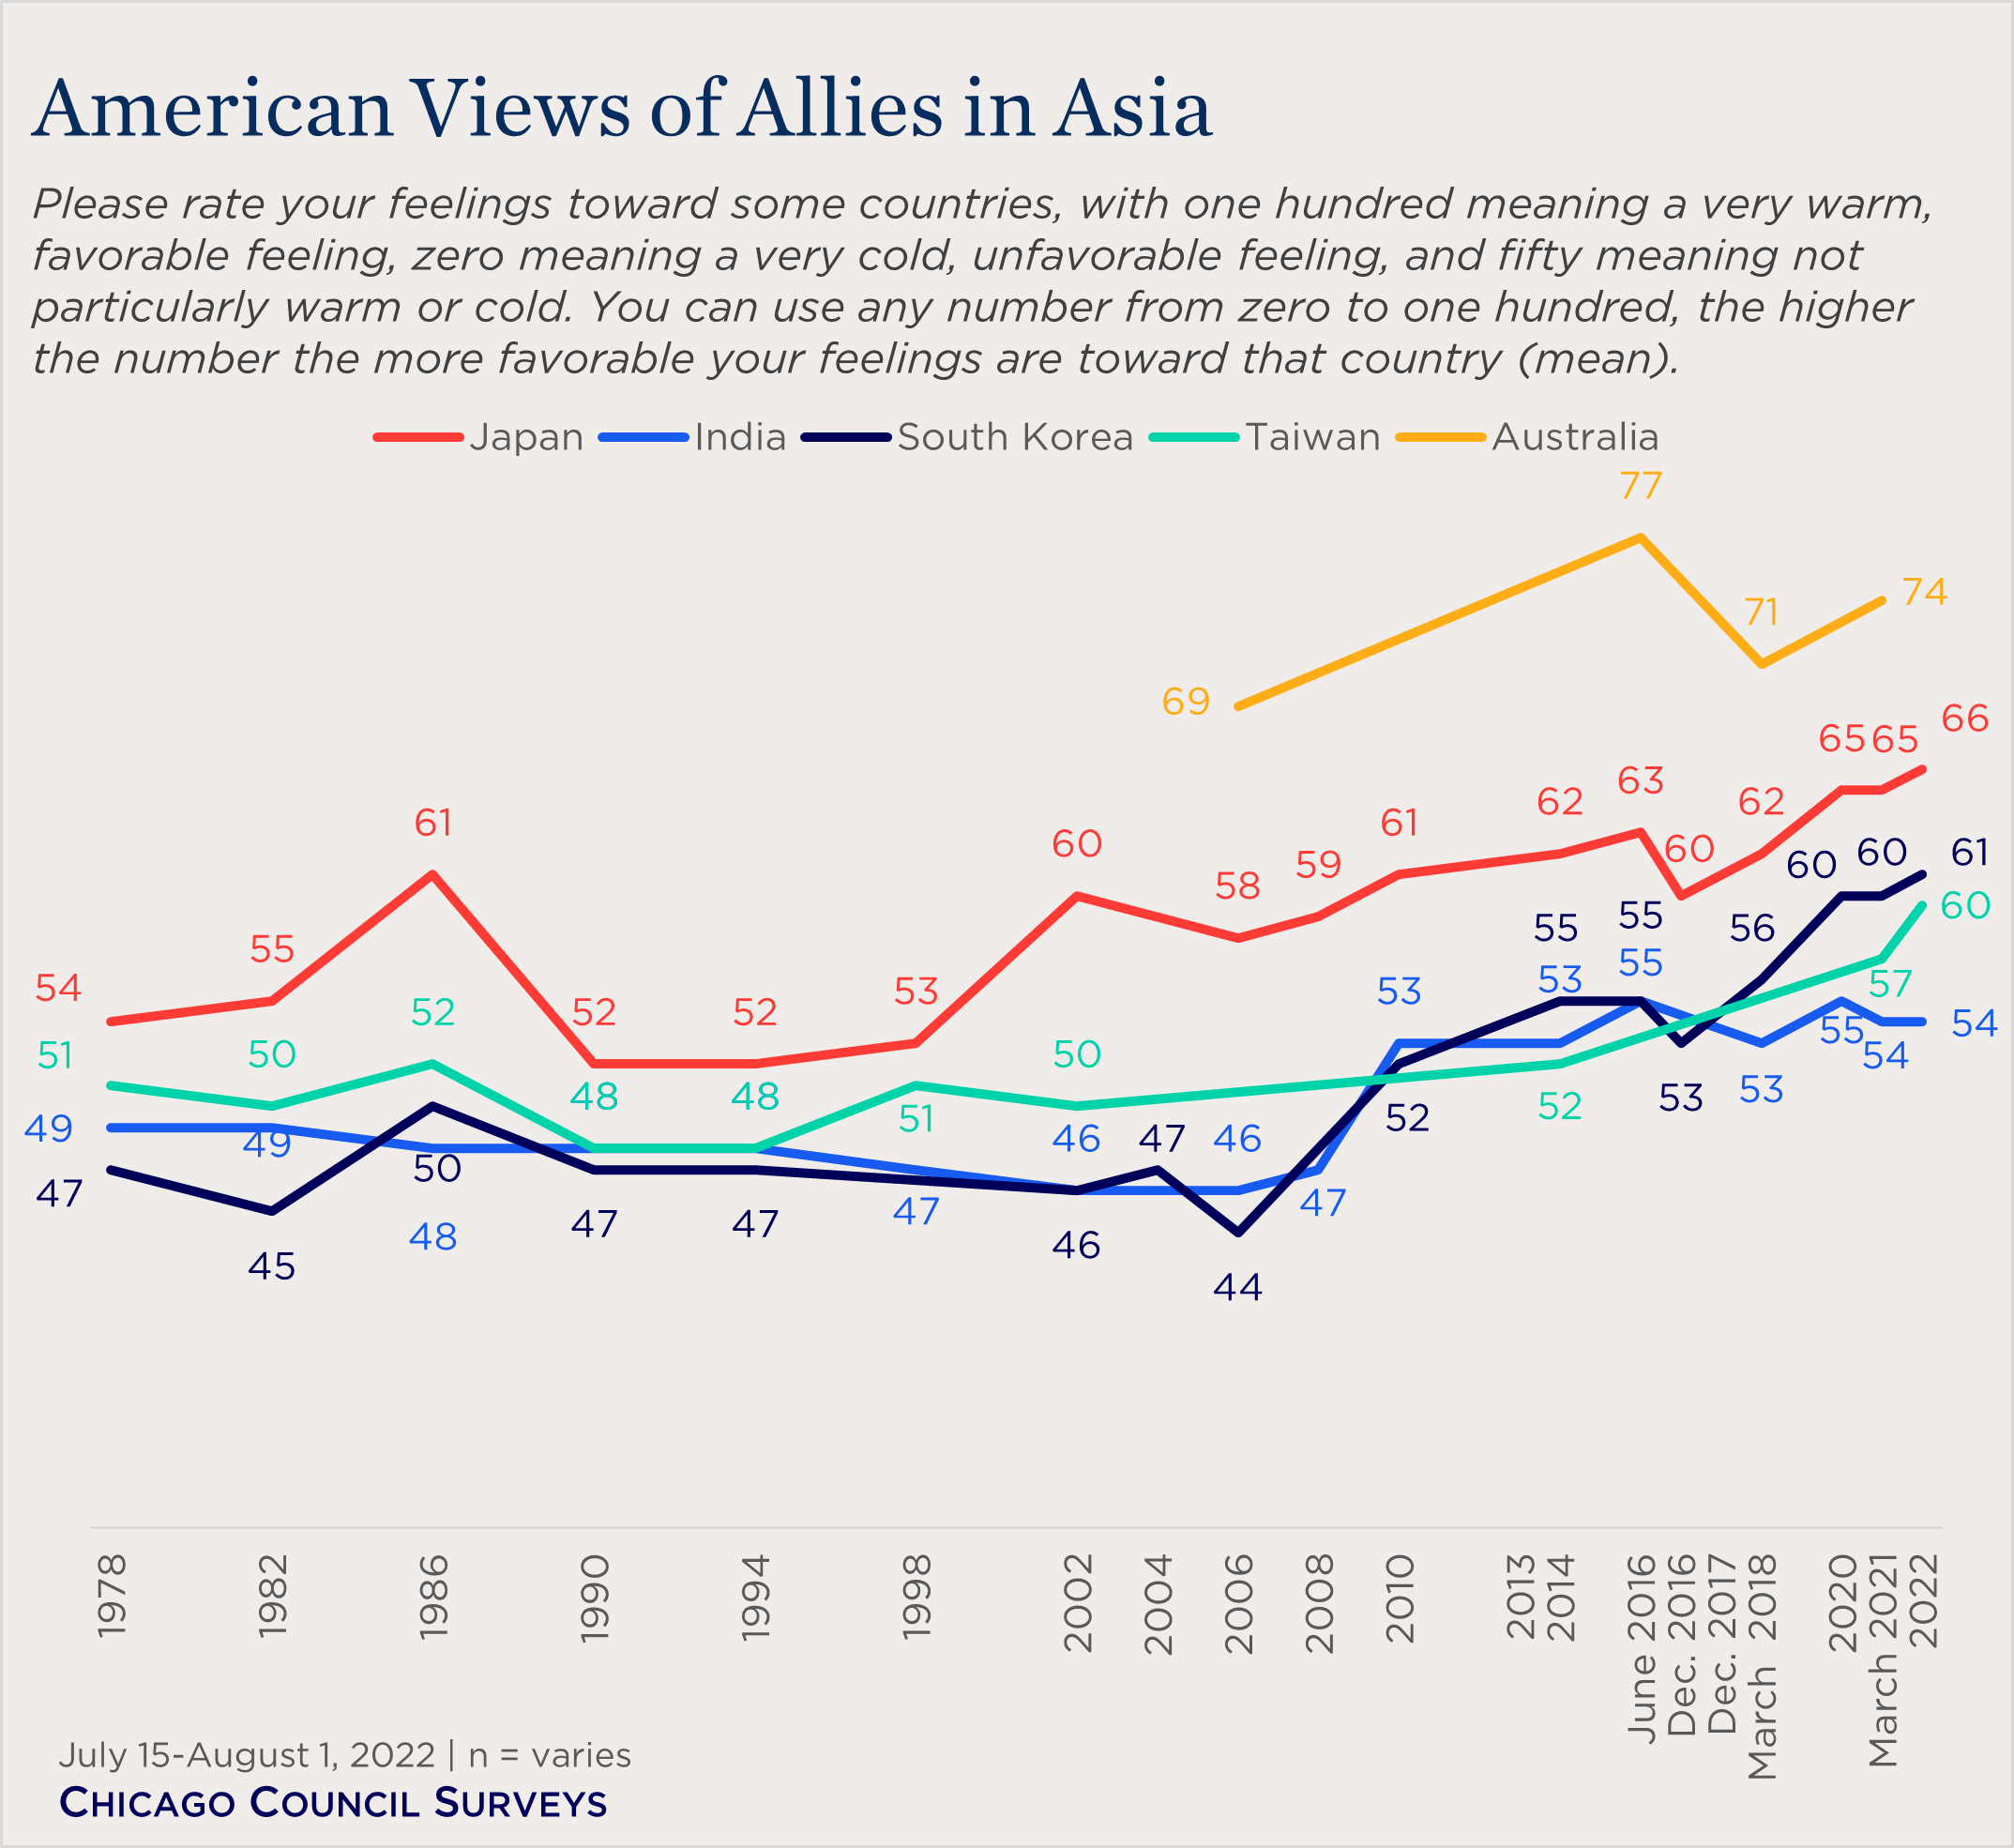 line chart showing American views of allies in Asia